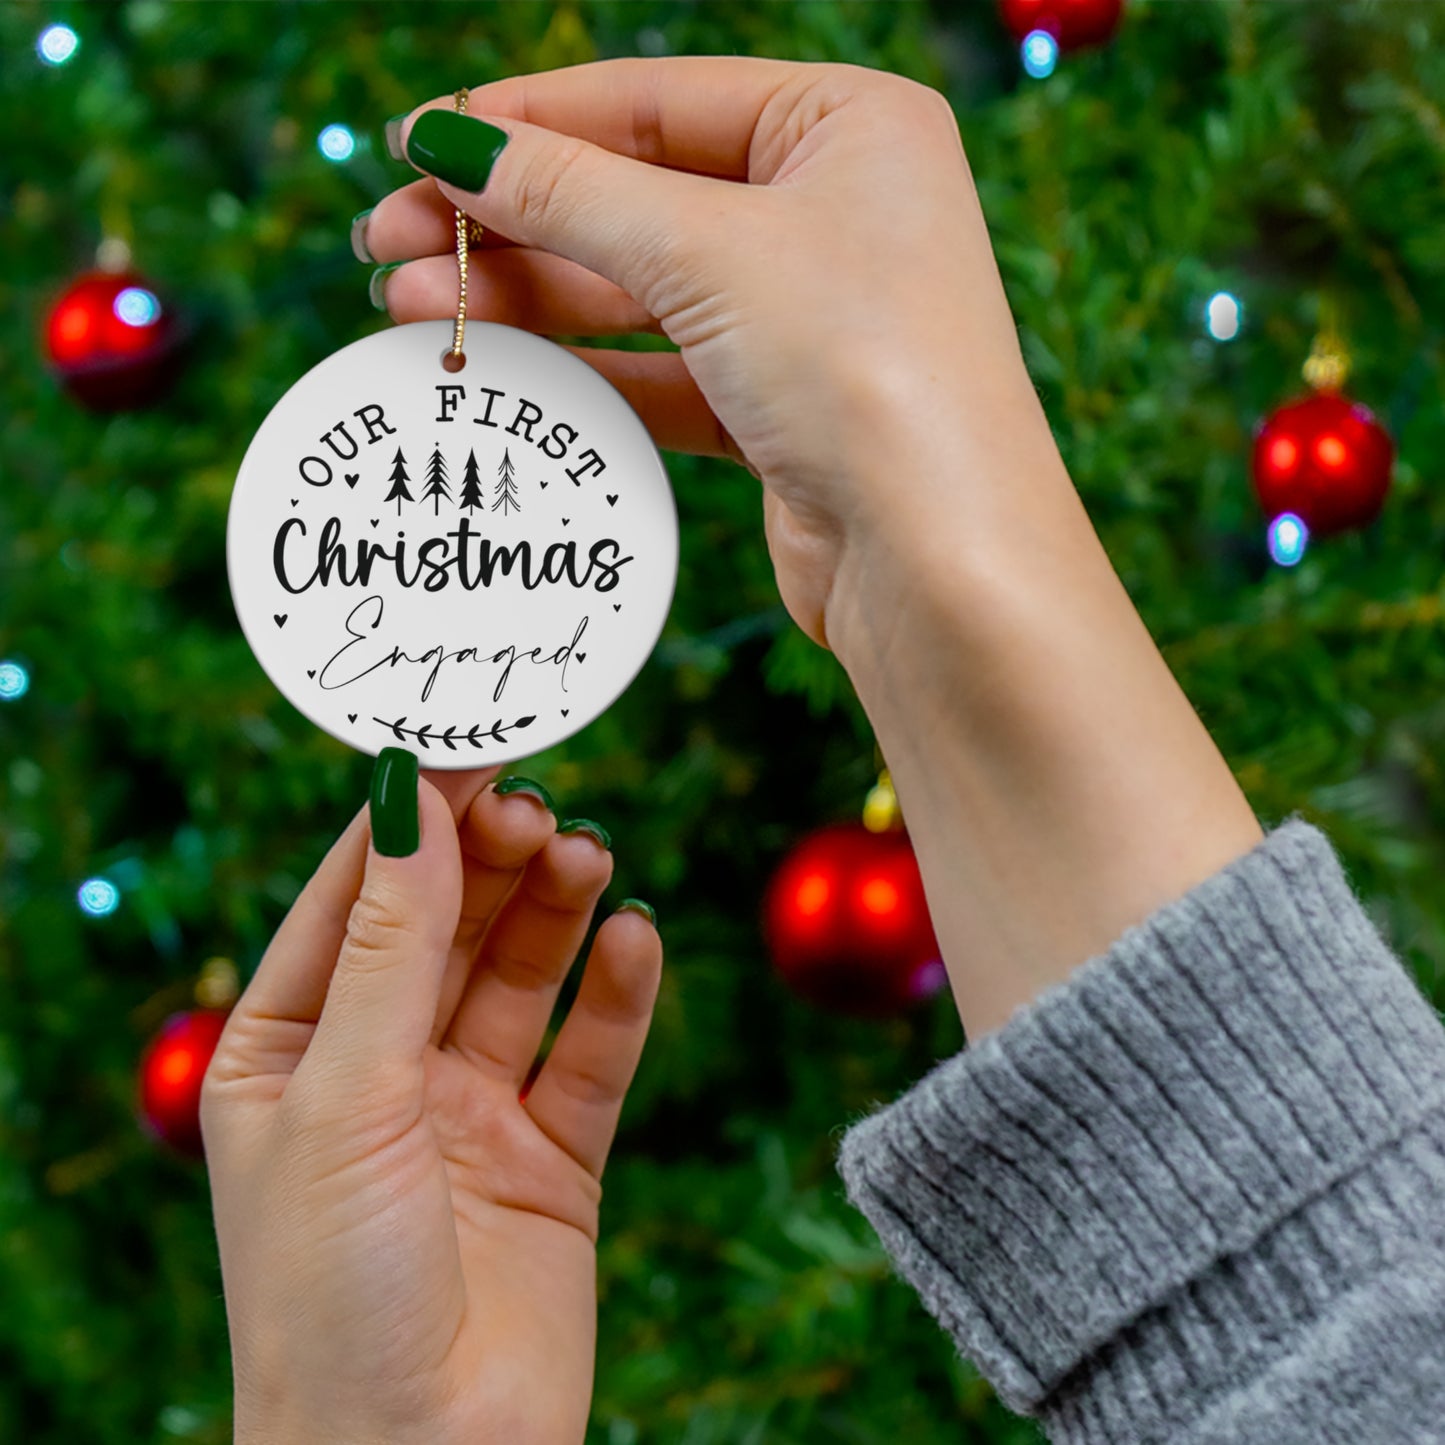 Our First Christmas Engaged Ceramic Ornament